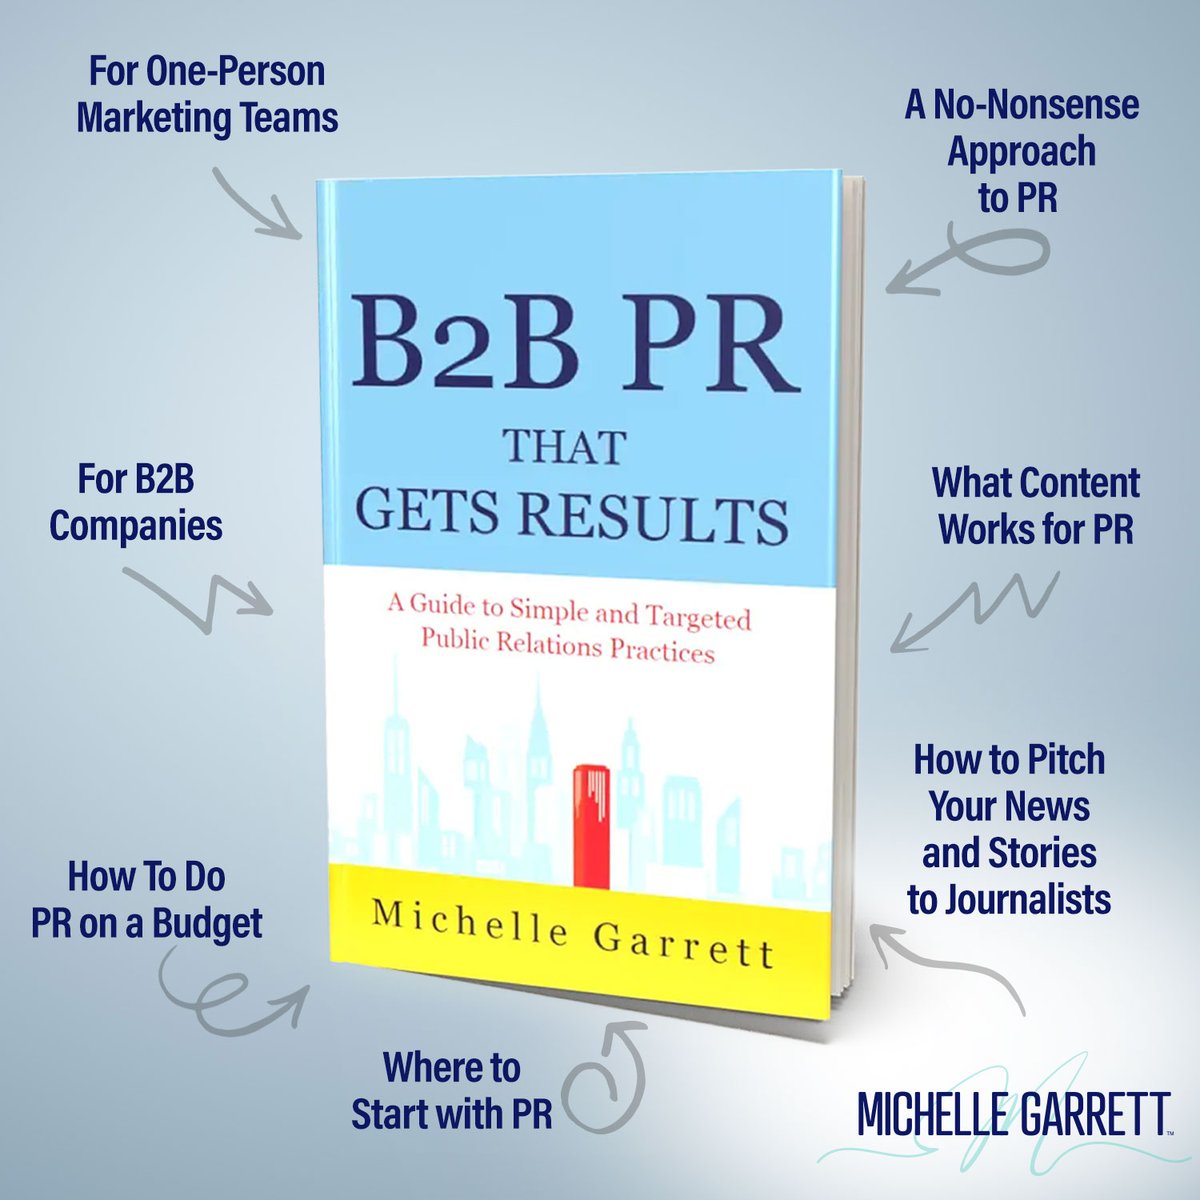 The book is out, the book is out! 📢

Who is it for? 🤔 

✅ B2B companies
✅ Small marketing teams 
✅ Those who need/want to do PR on a budget
✅ Those looking for a *practical* approach to PR 
✅ Those who want more pitching tips & advice

#B2BPRThatGetsResults #newauthor